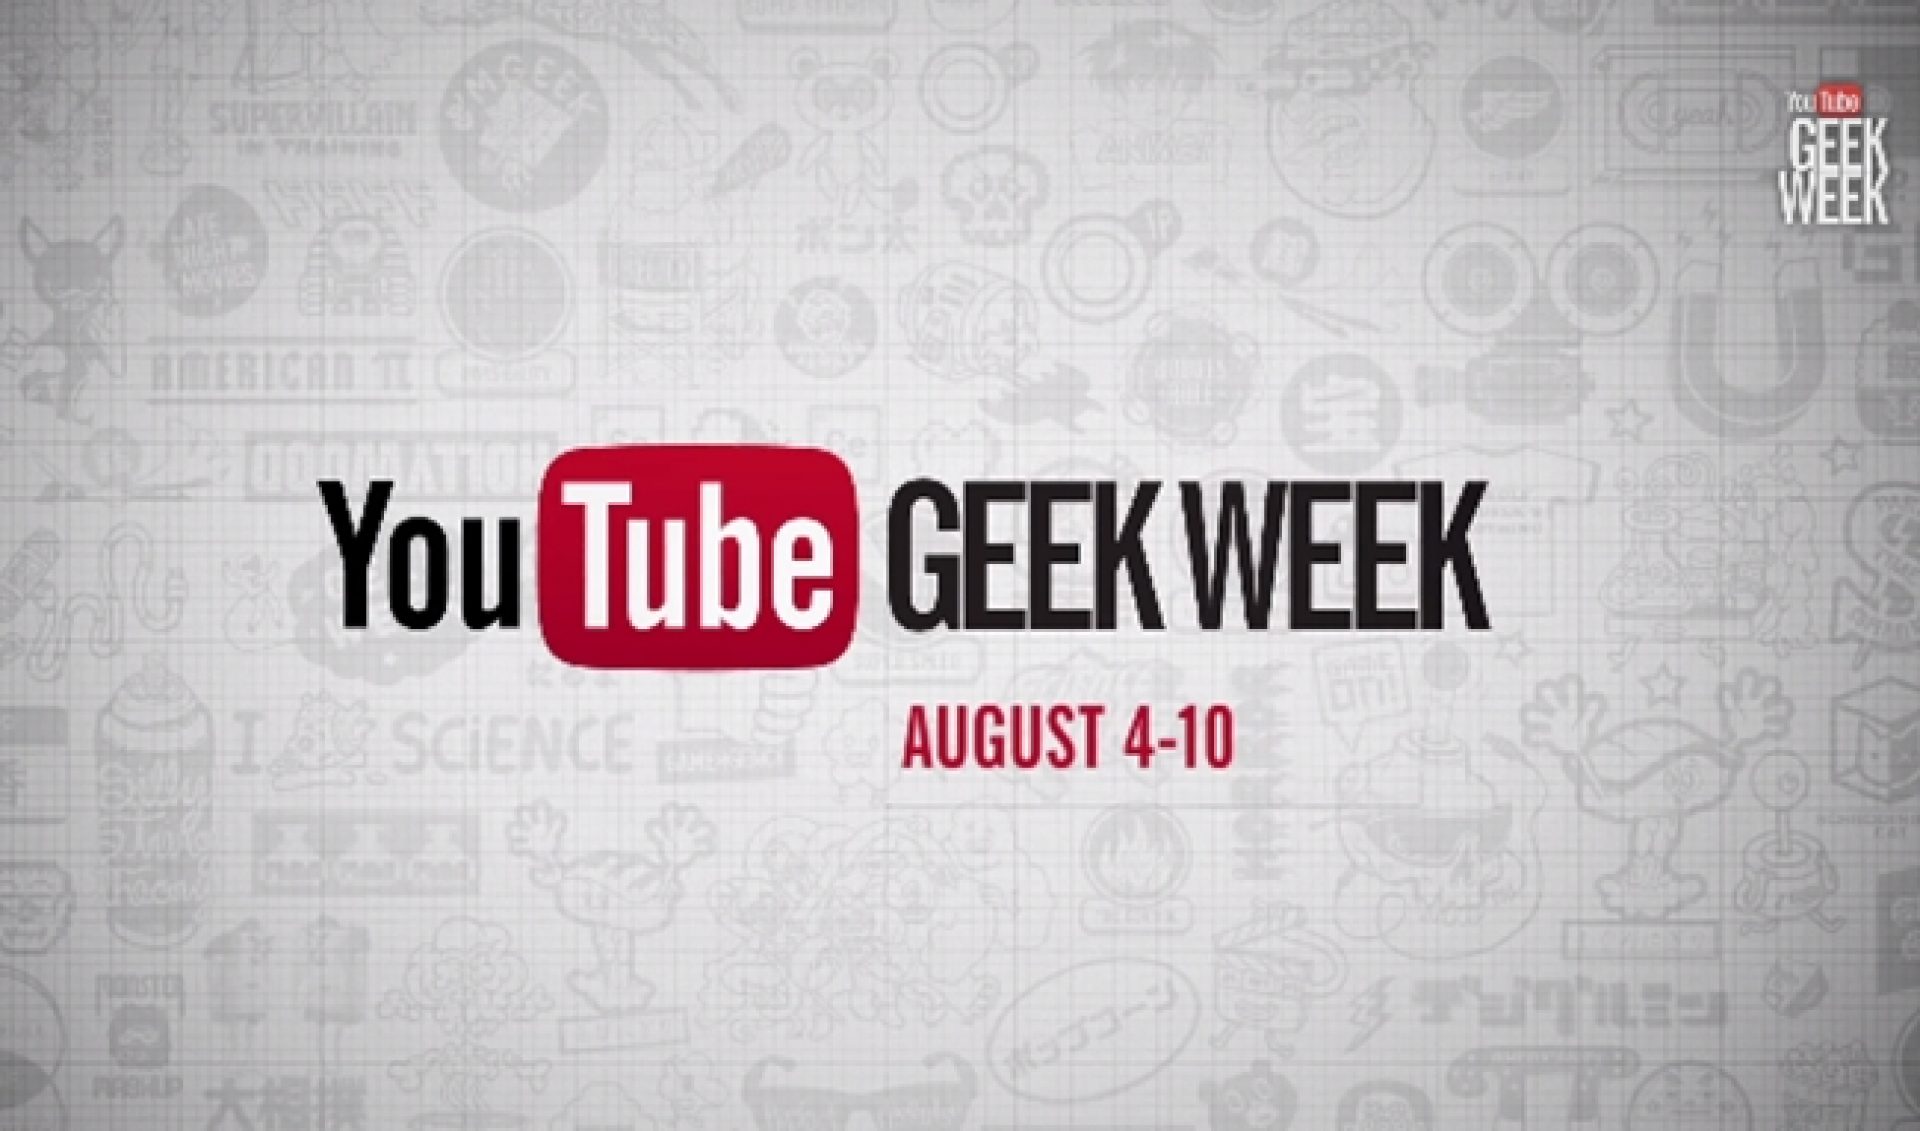 Geek Week Officially Coming August 4th As YouTube Releases Teaser